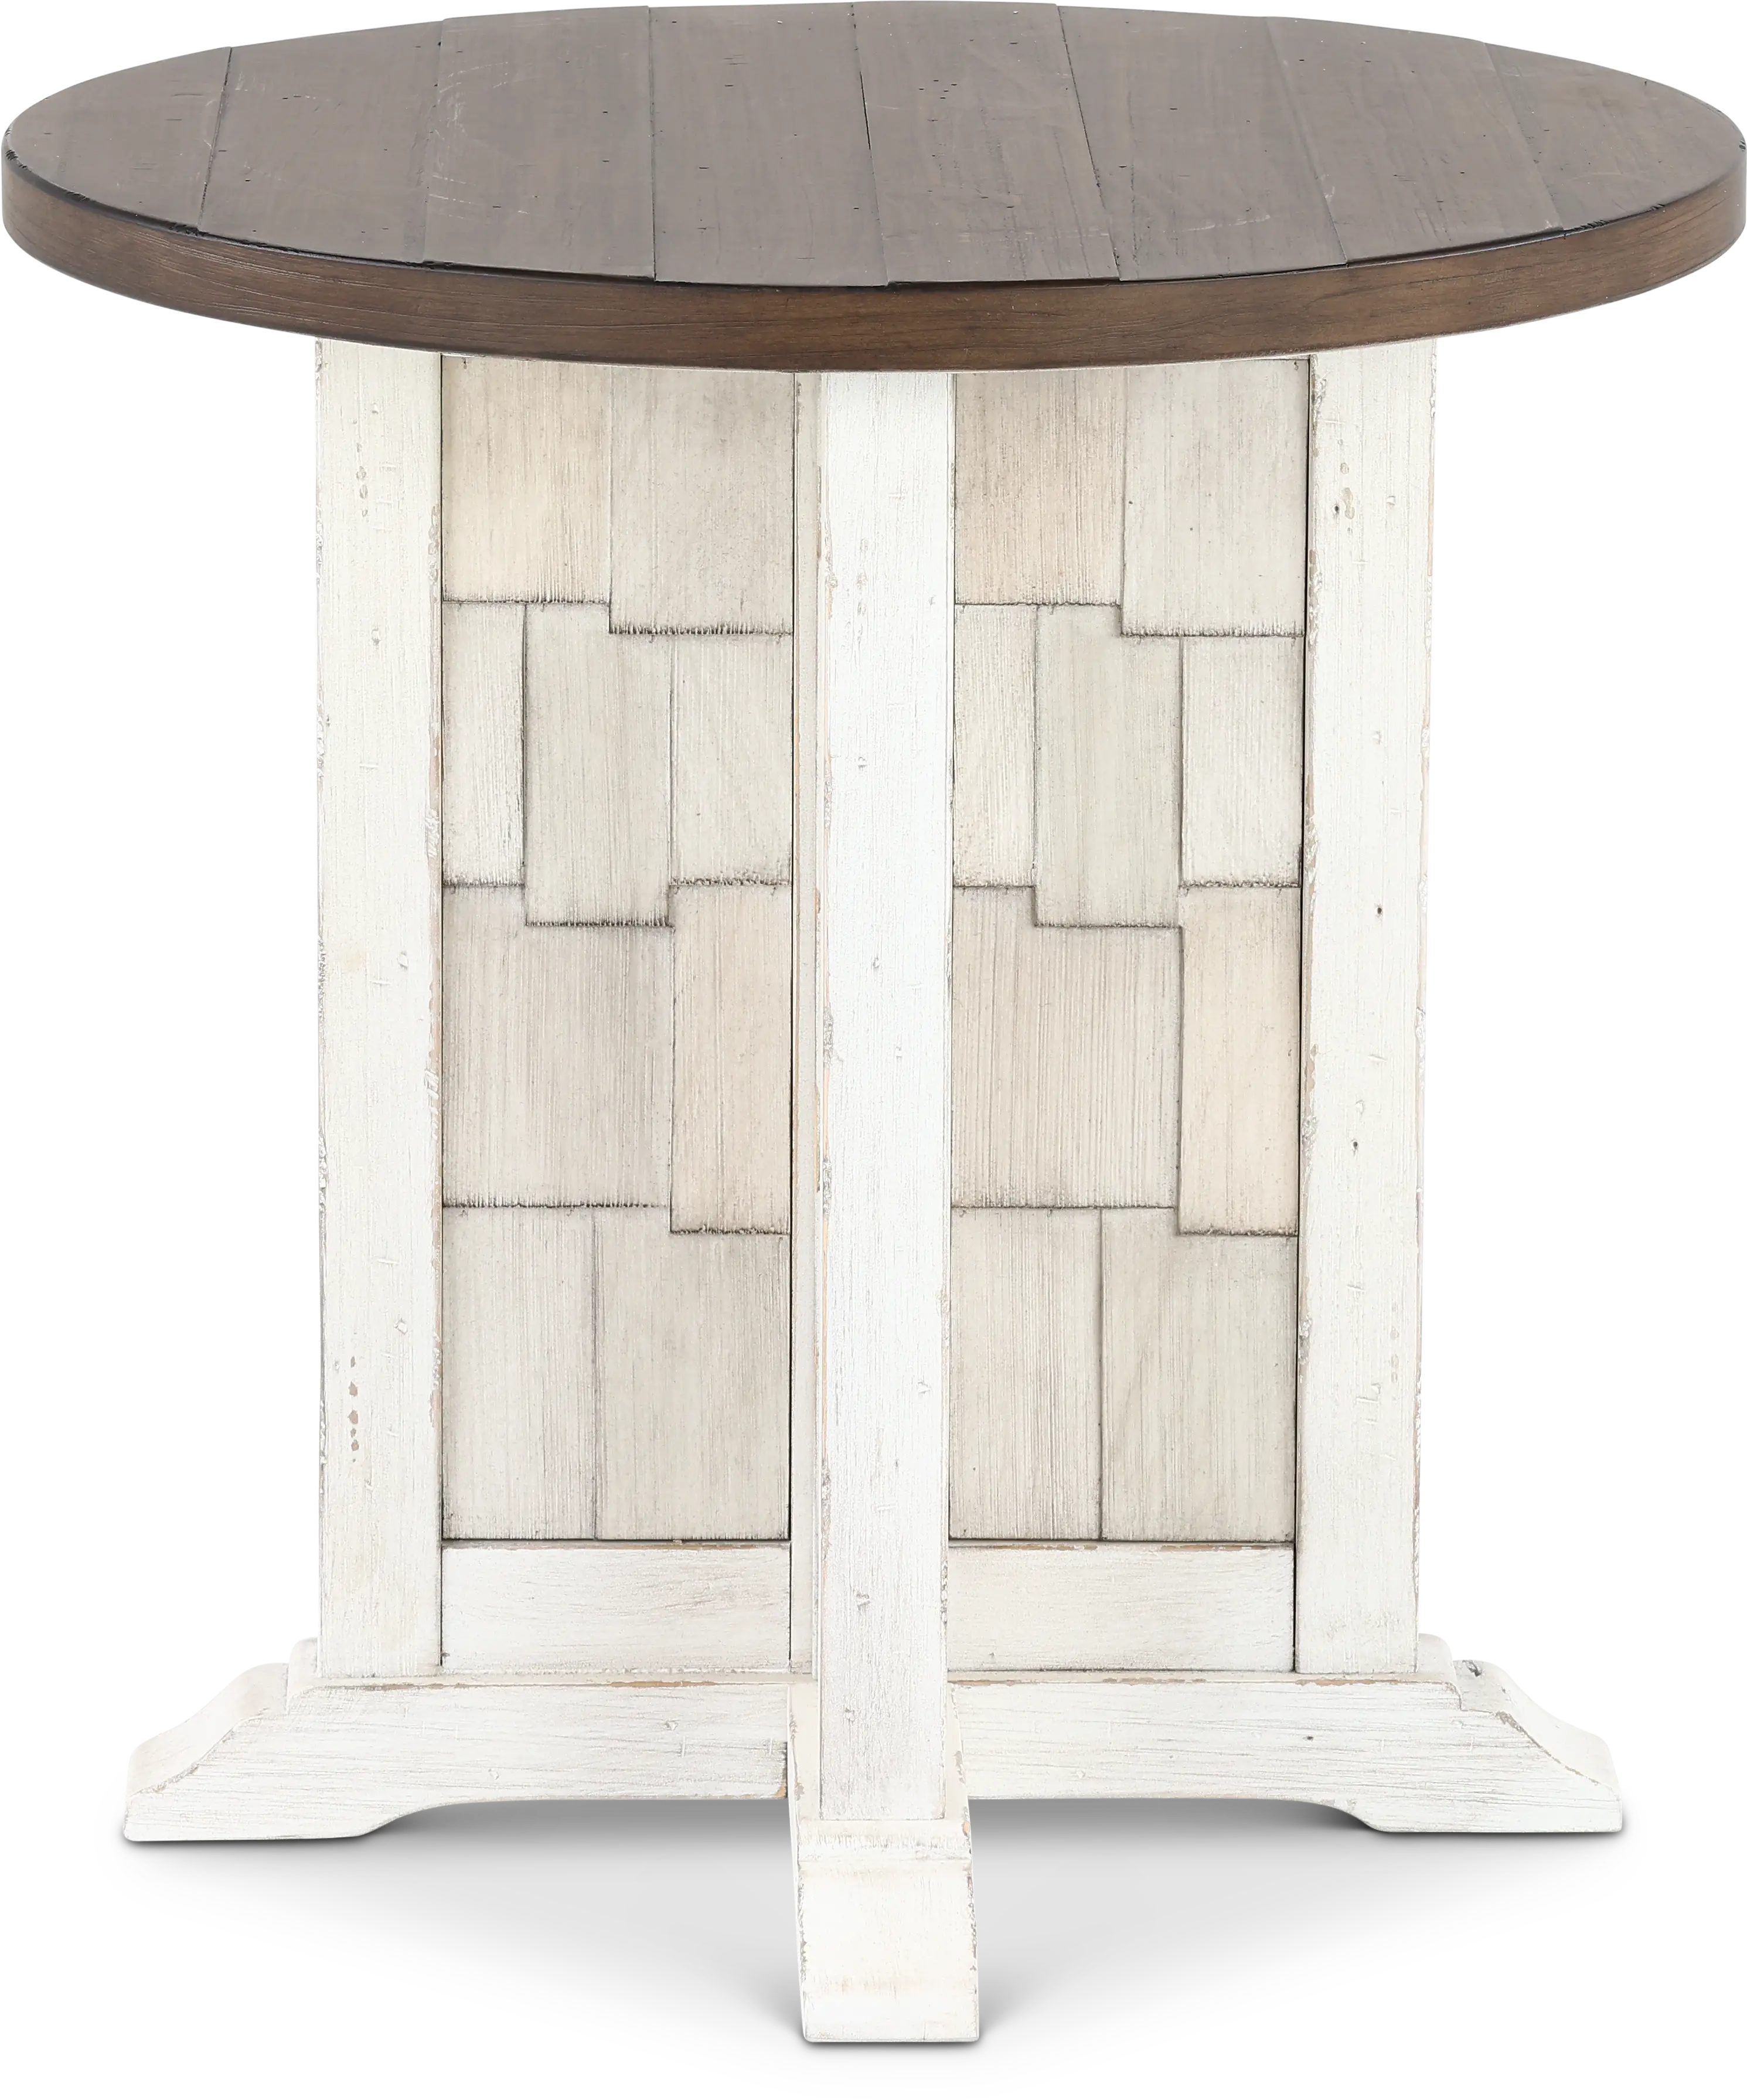 River Place White and Brown Chairside Table